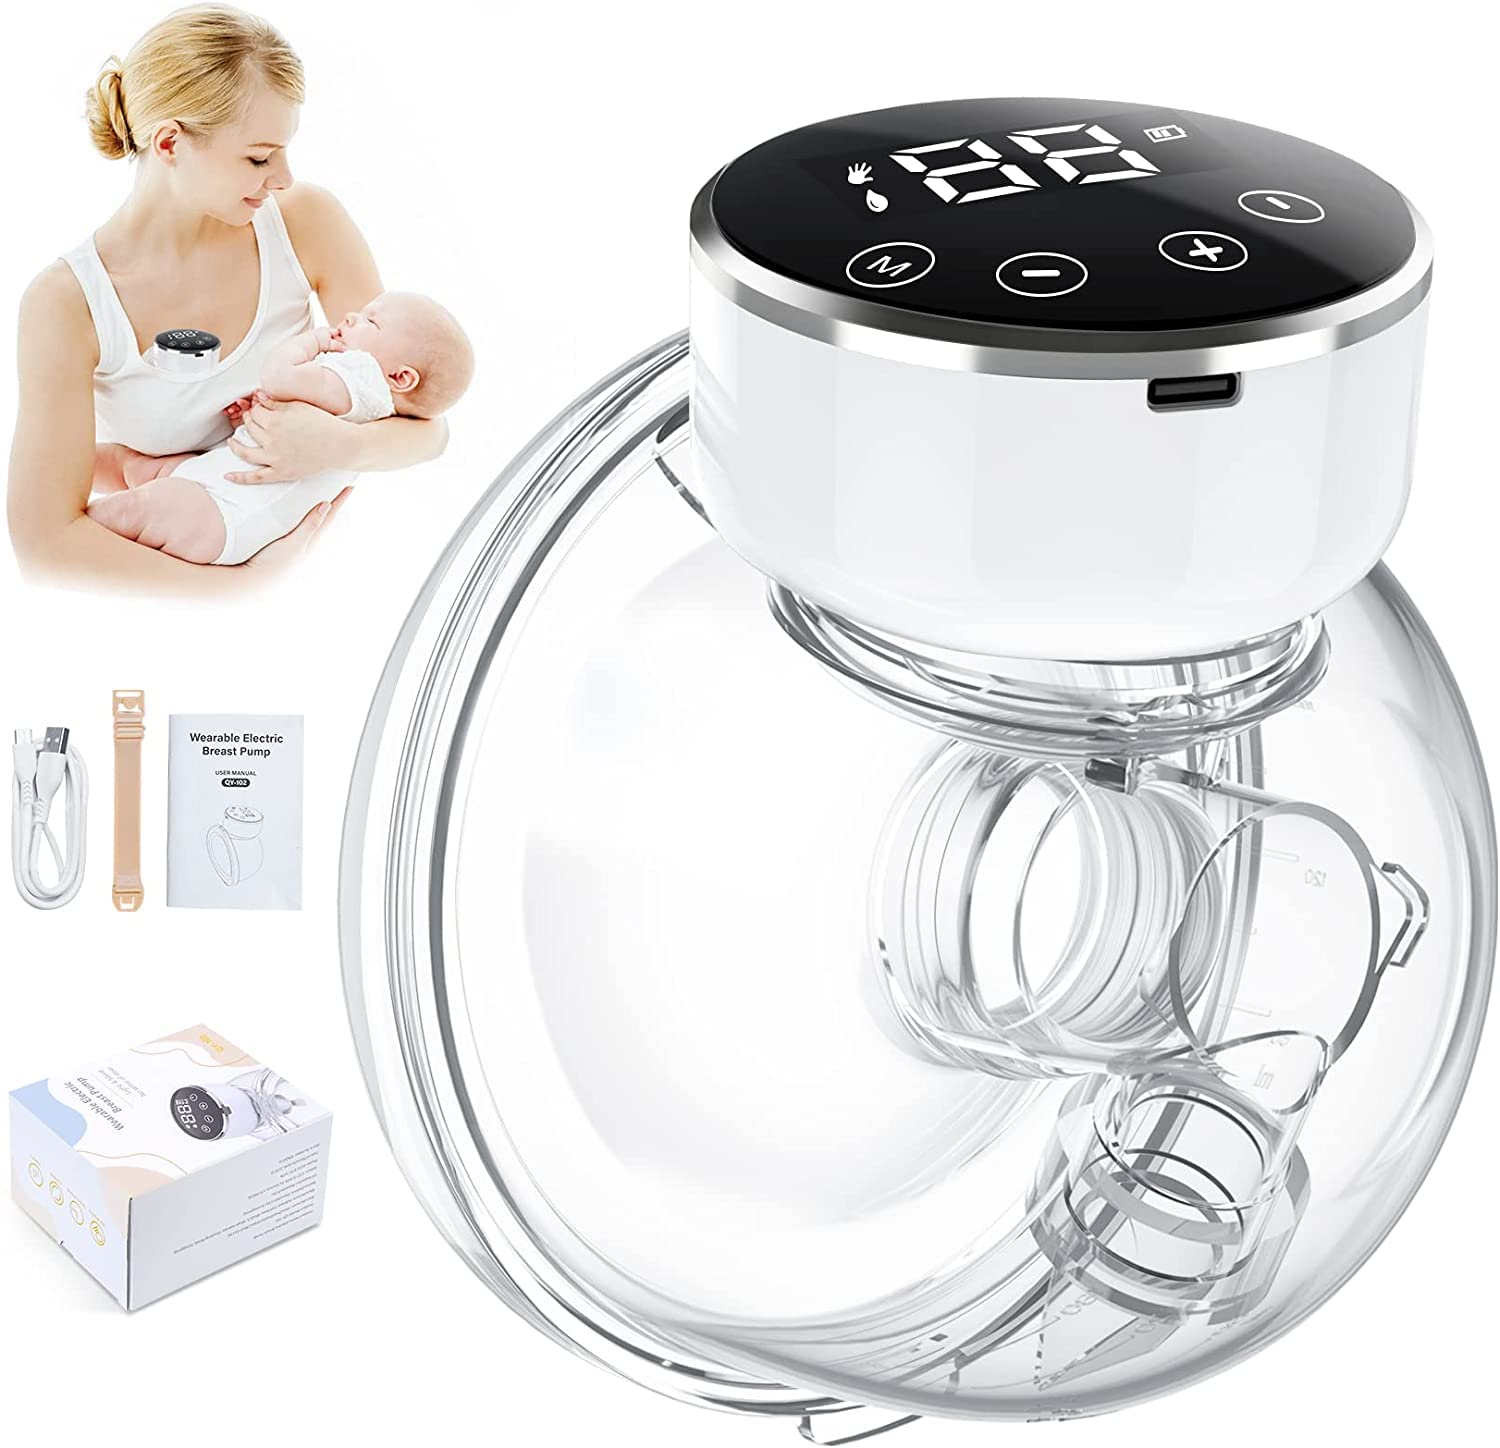 URMYWO Wearable Breast Pump, Hands Free Breast Pump, Electric Breast Pump, Portable Breast Pump with 3 Modes & 9 Levels, LCD Display, Wireless Breast Pump with Massage Mode, 17/ 19/ 21/ 24mm Flanges